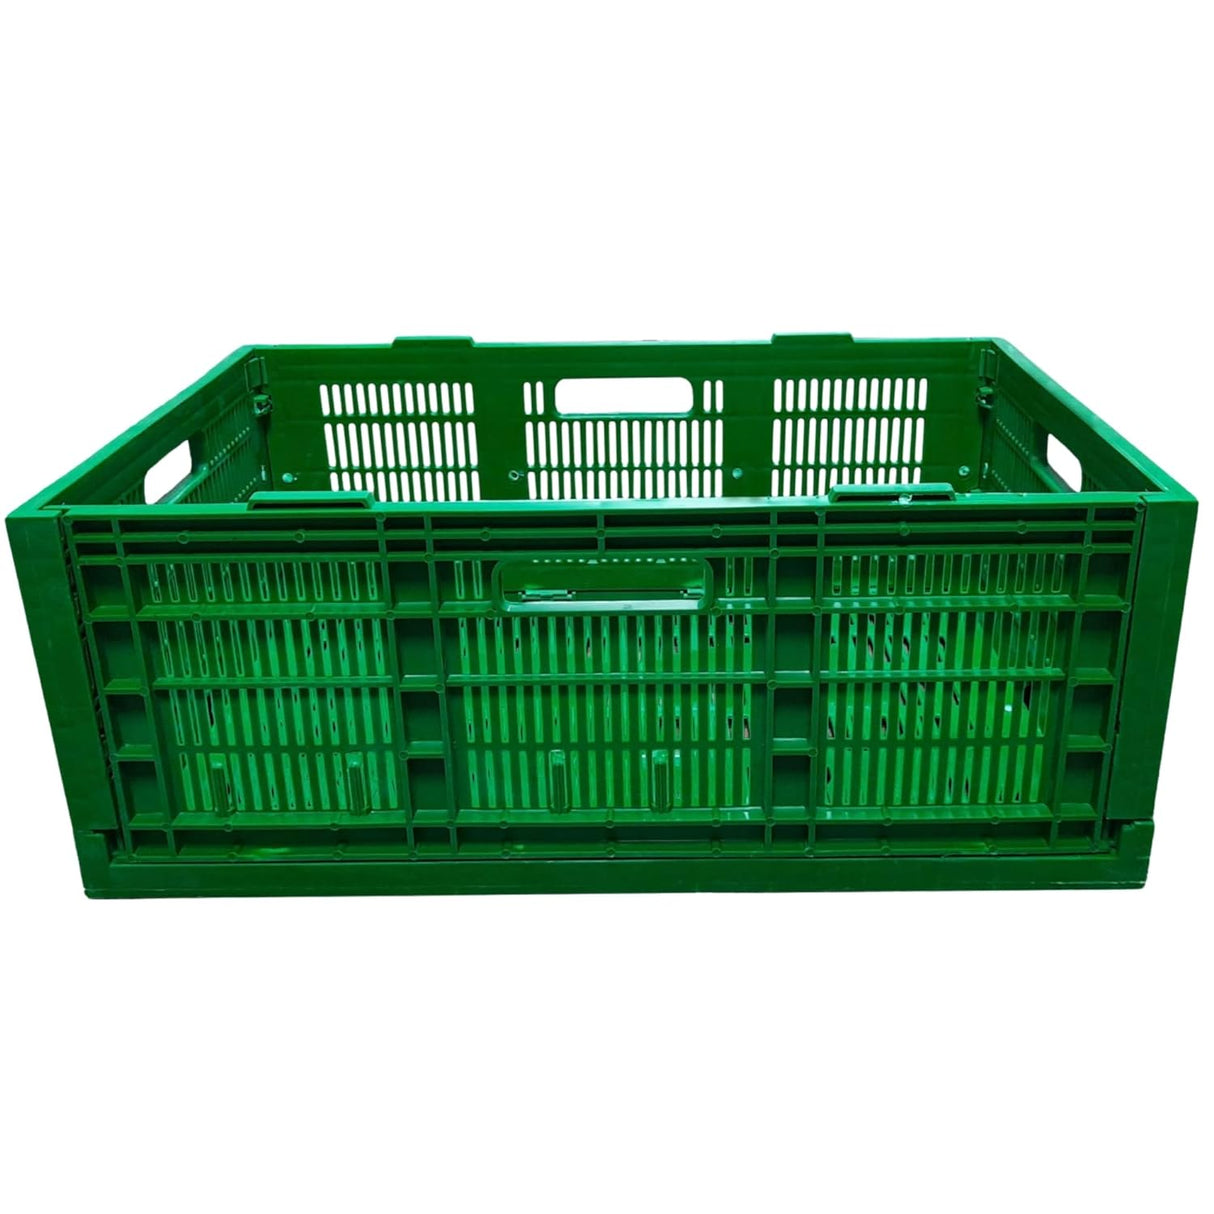 SINGHAL Storage Crates Pack of 2, Stackable Plastic Container Foldable Basket Multipurpose 500x325x200 mm - Green